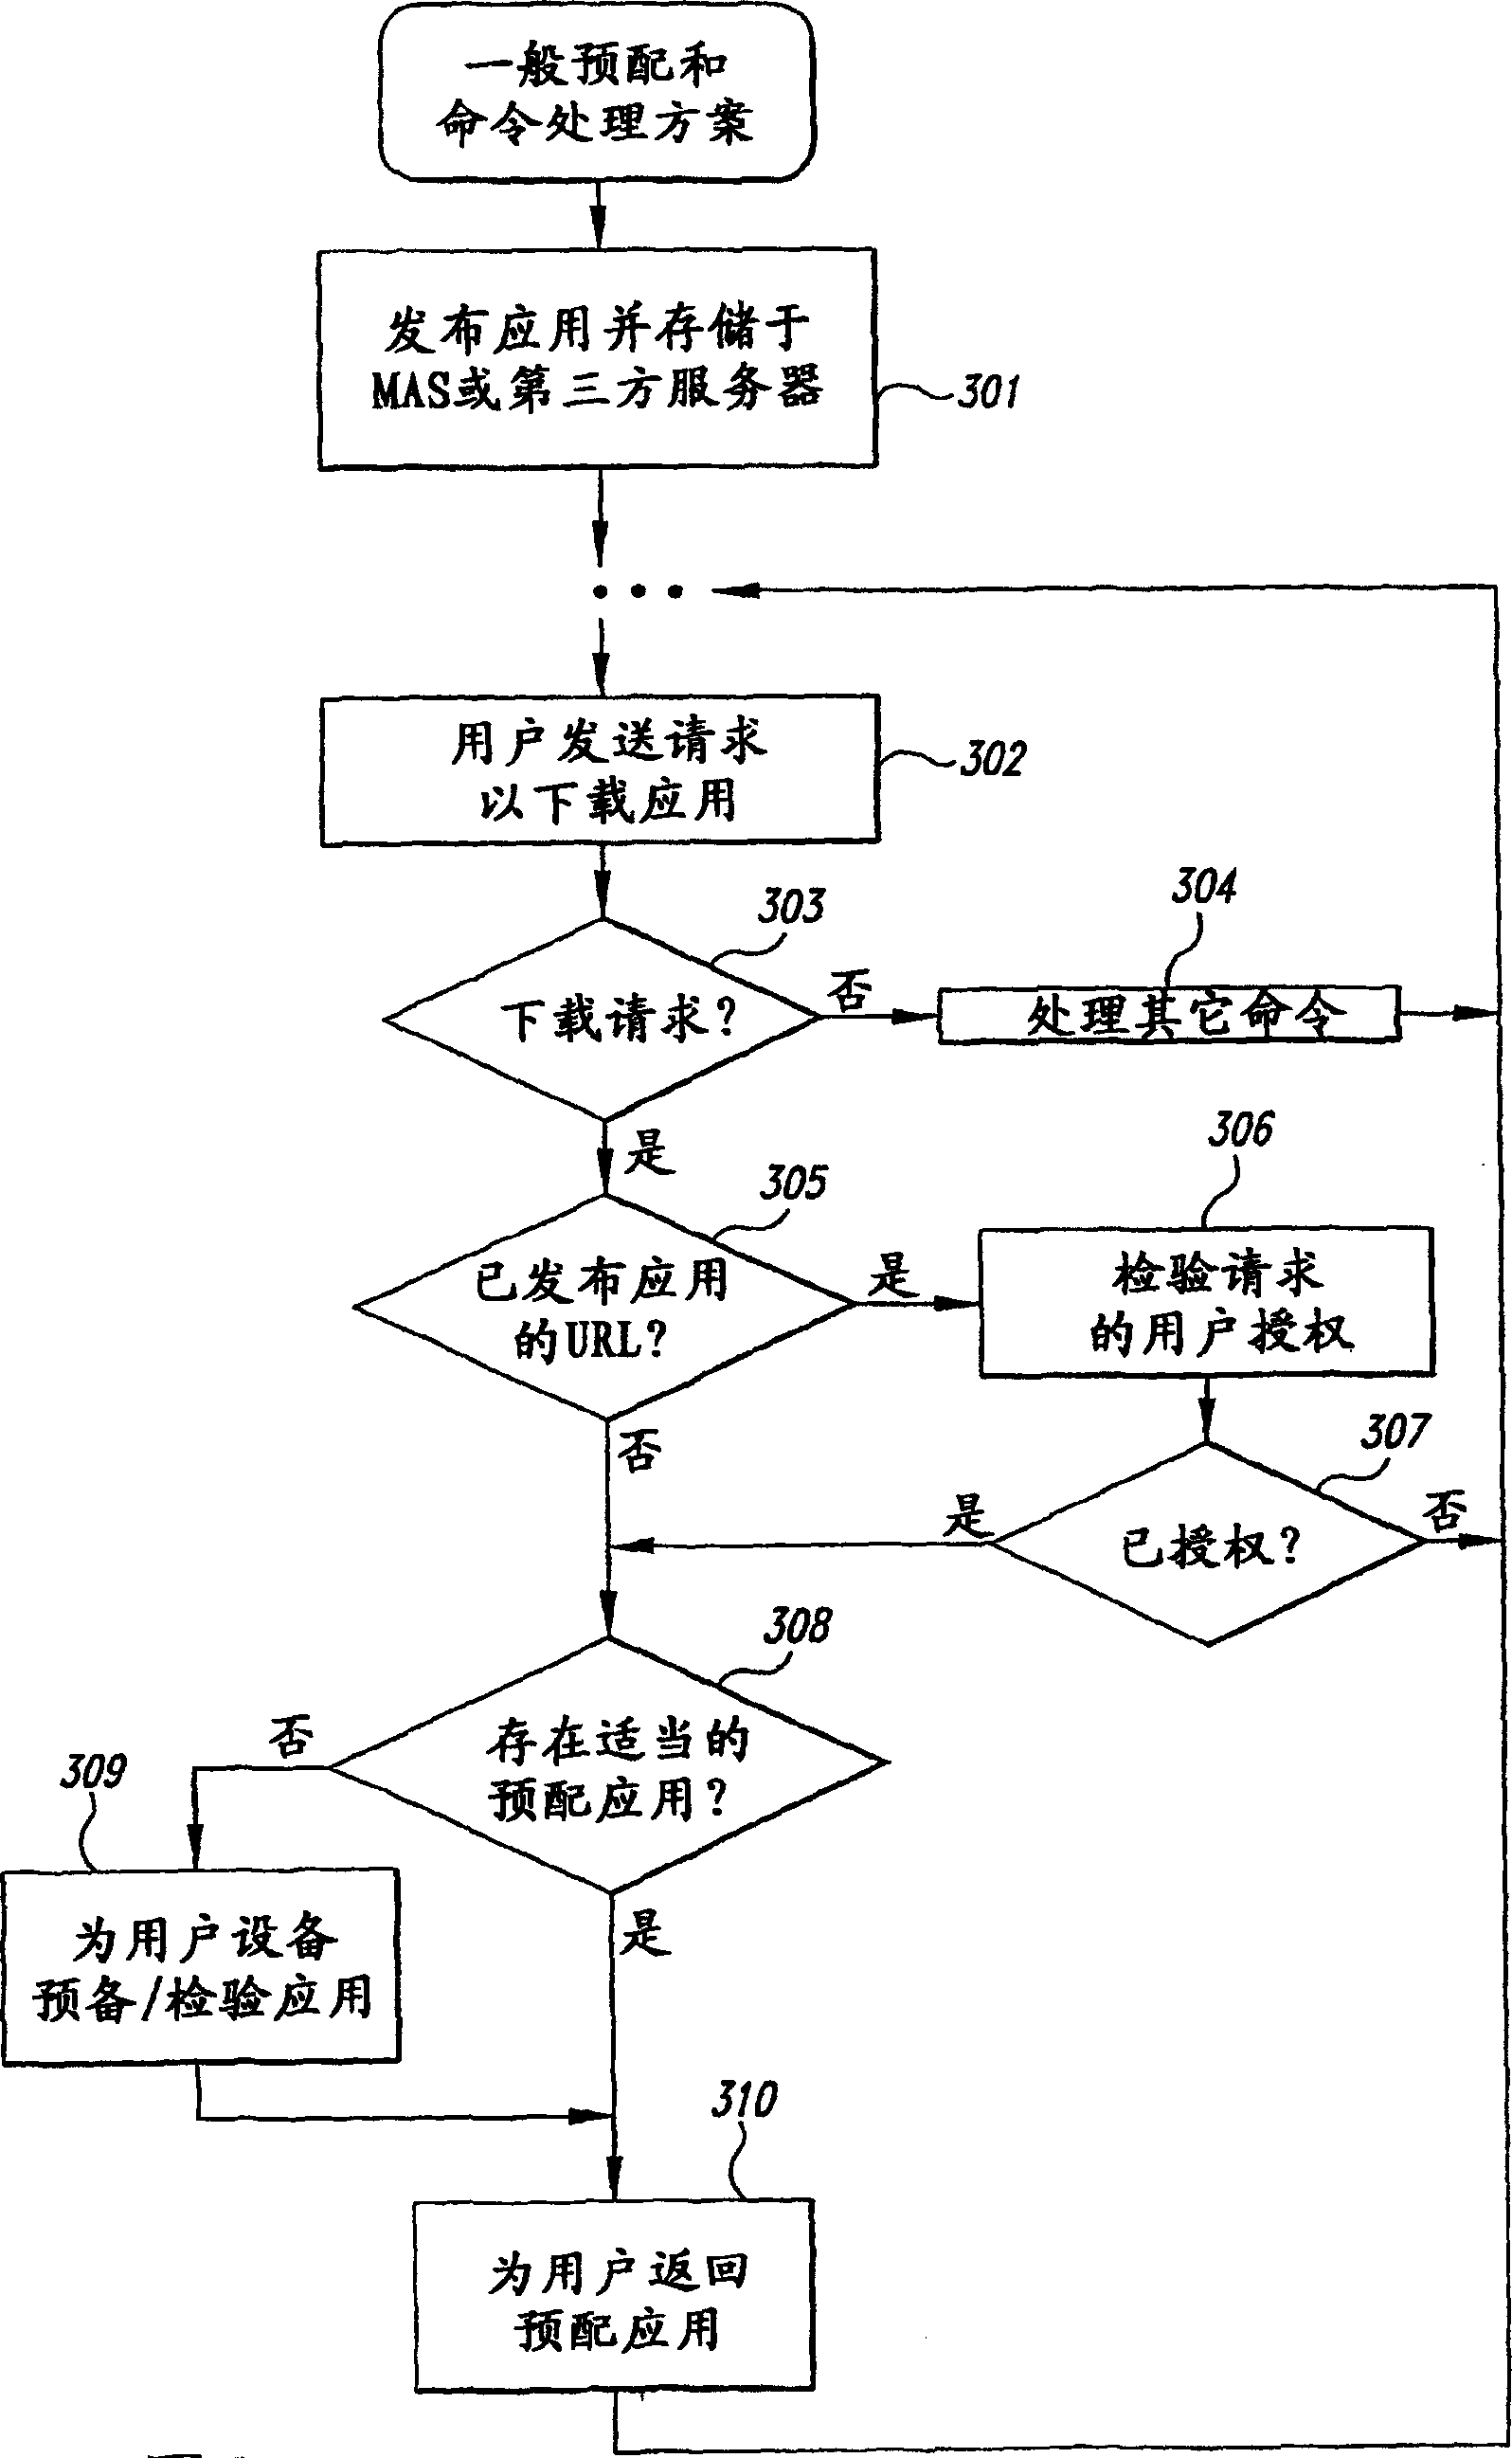 Method and system for maintaining and distributing wireless applications